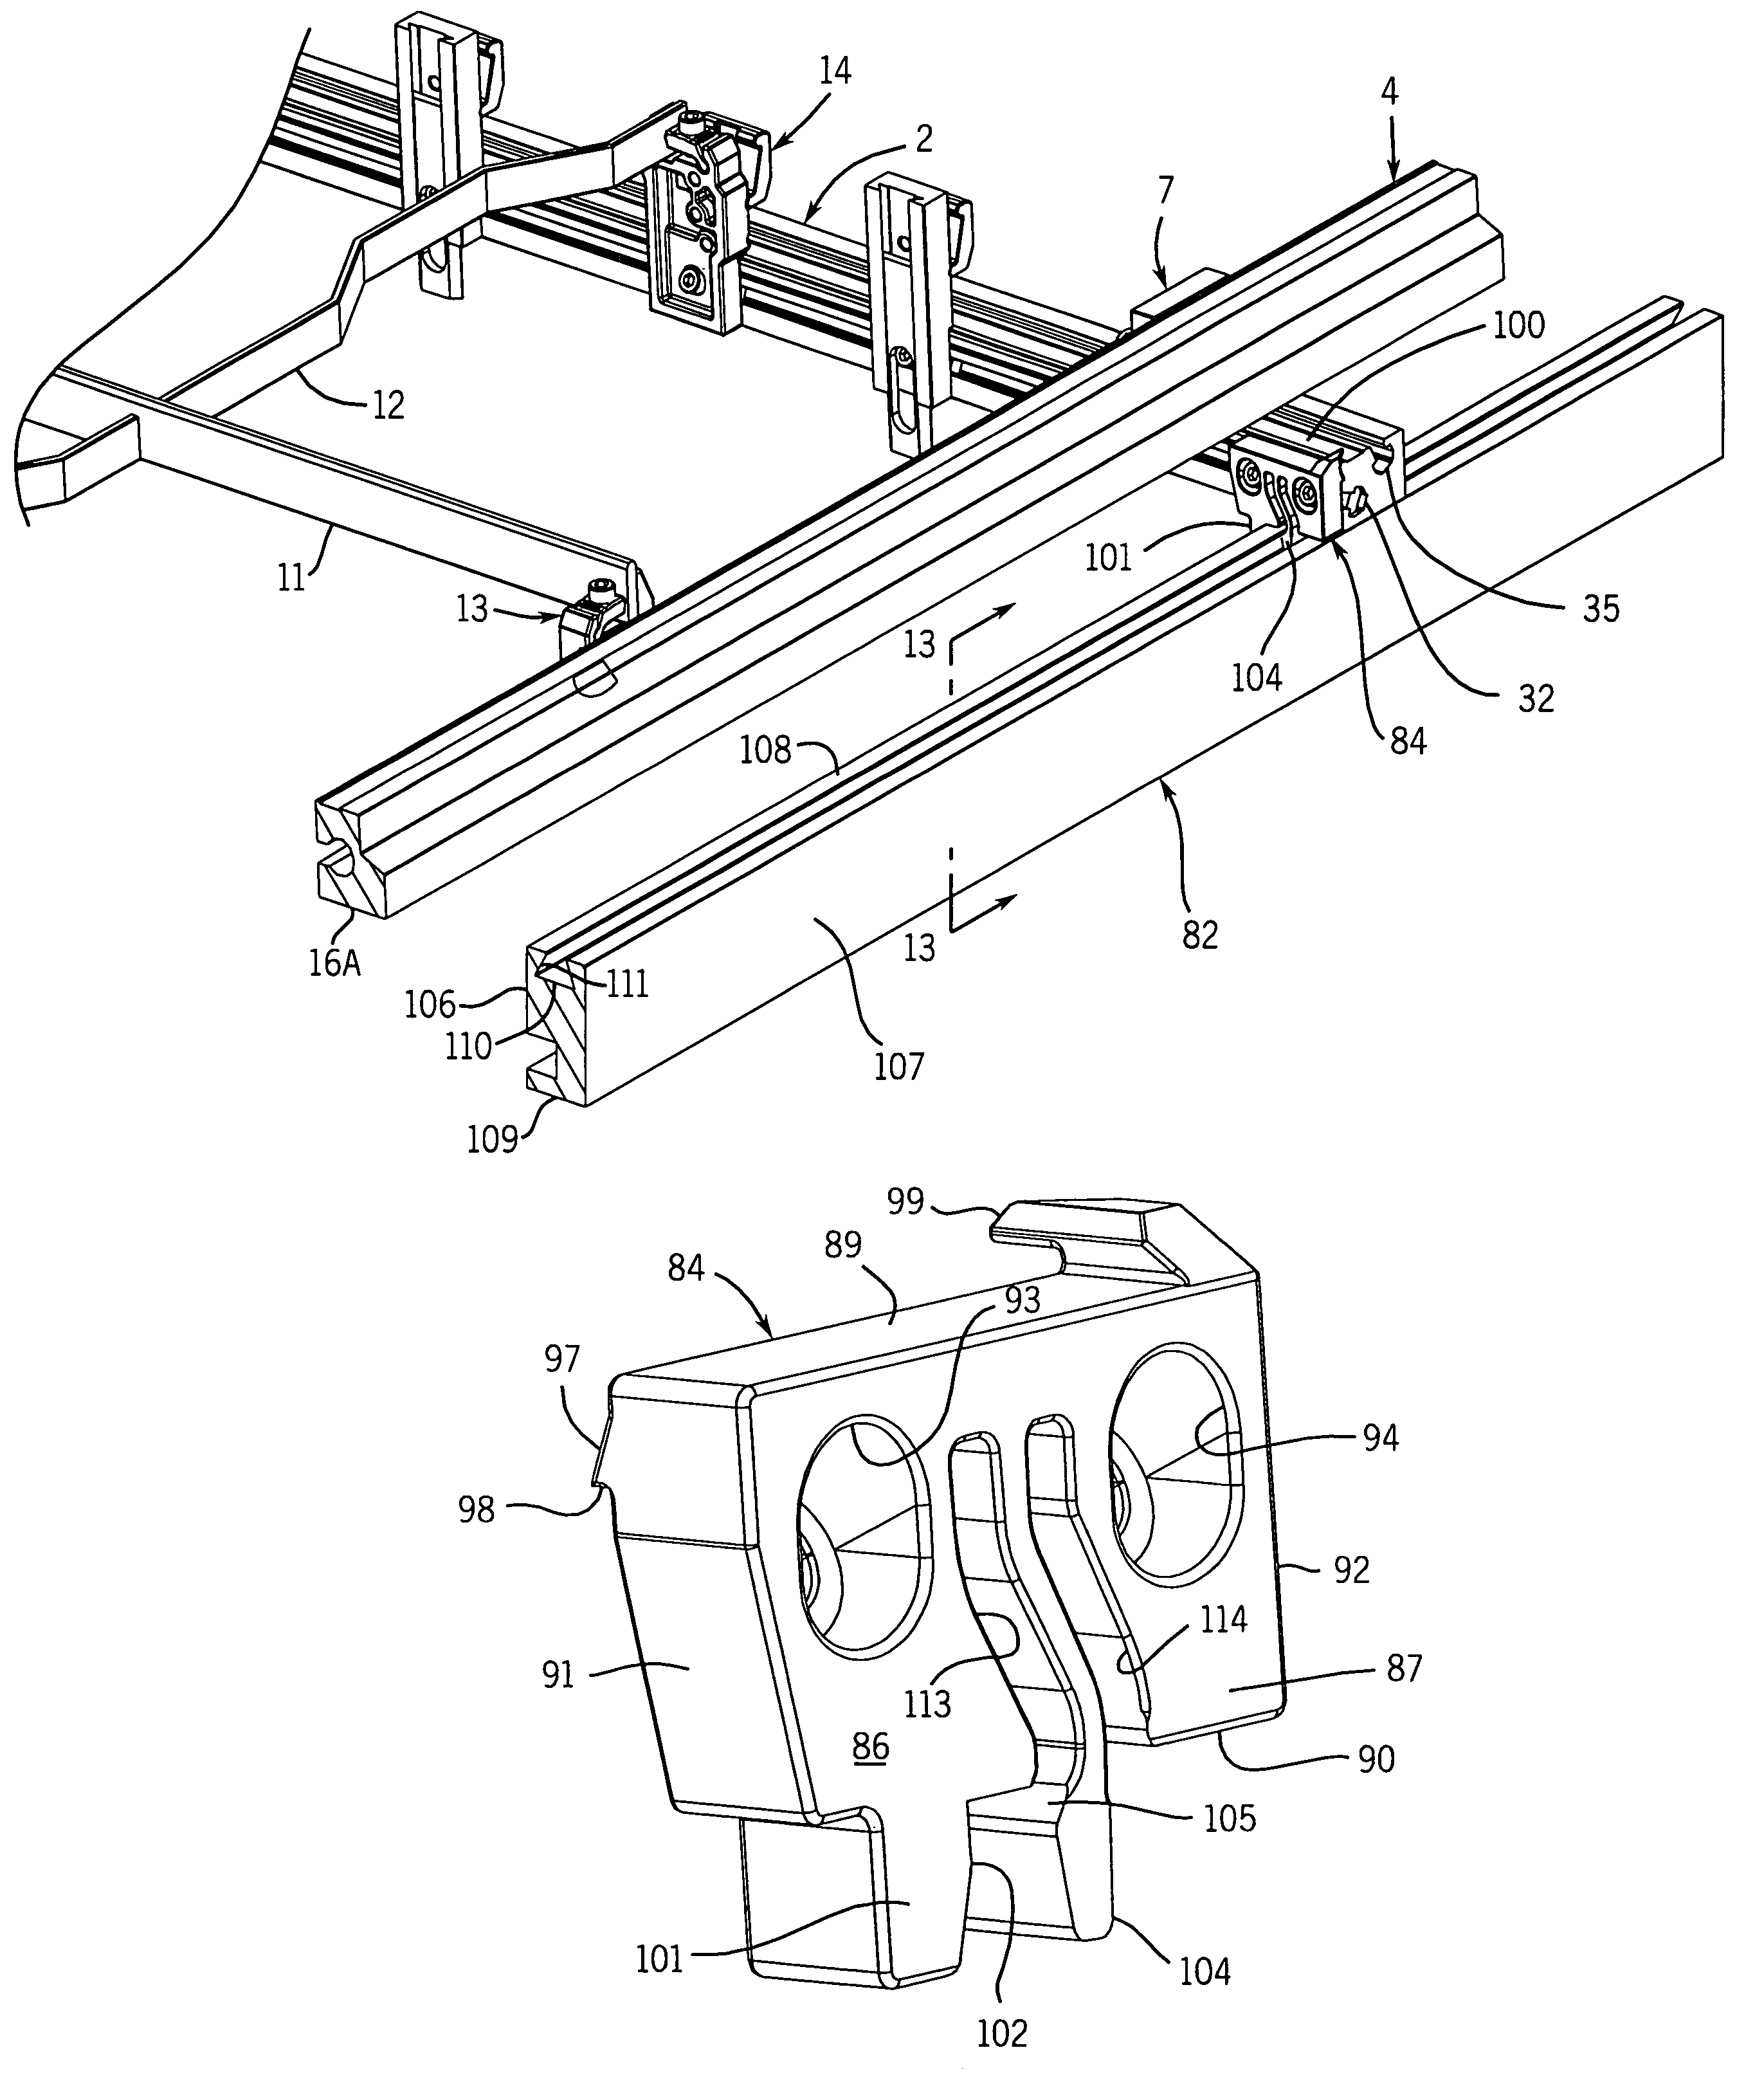 Locator bracket for the lower frame assembly of a blanking tool